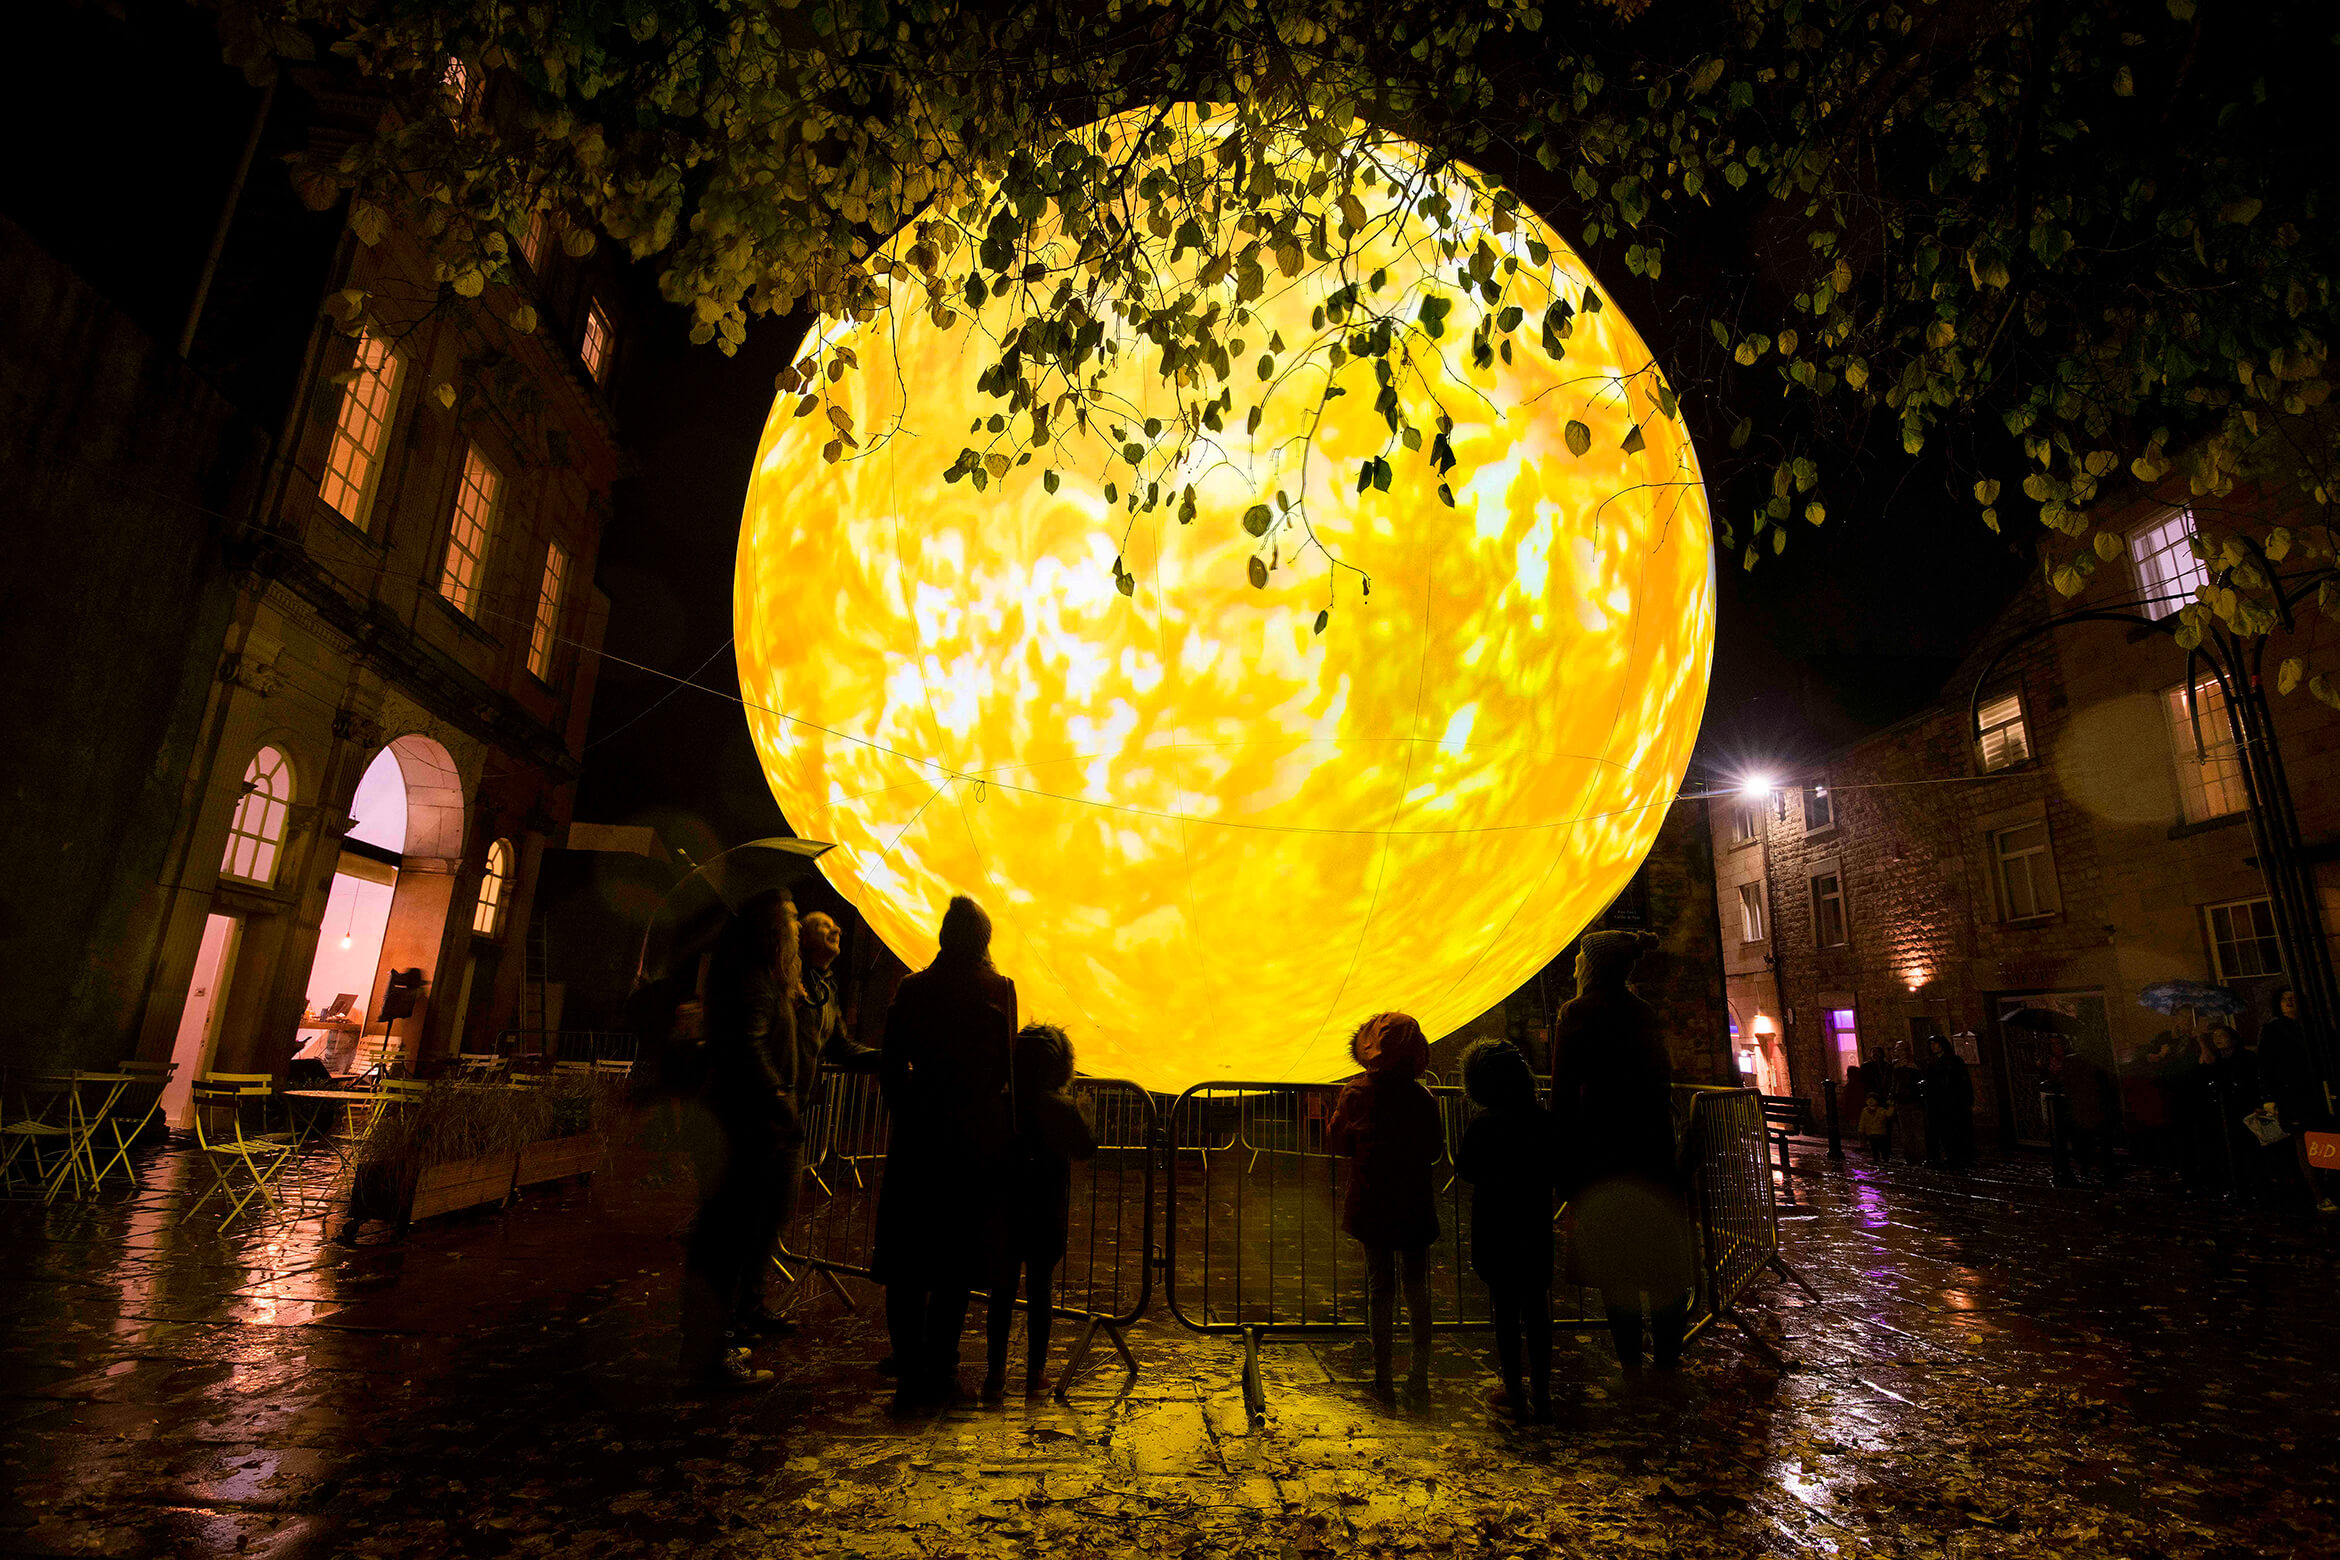 Photograph of SUN taken outside at night and showing in a group of people watching it during its yellow phase